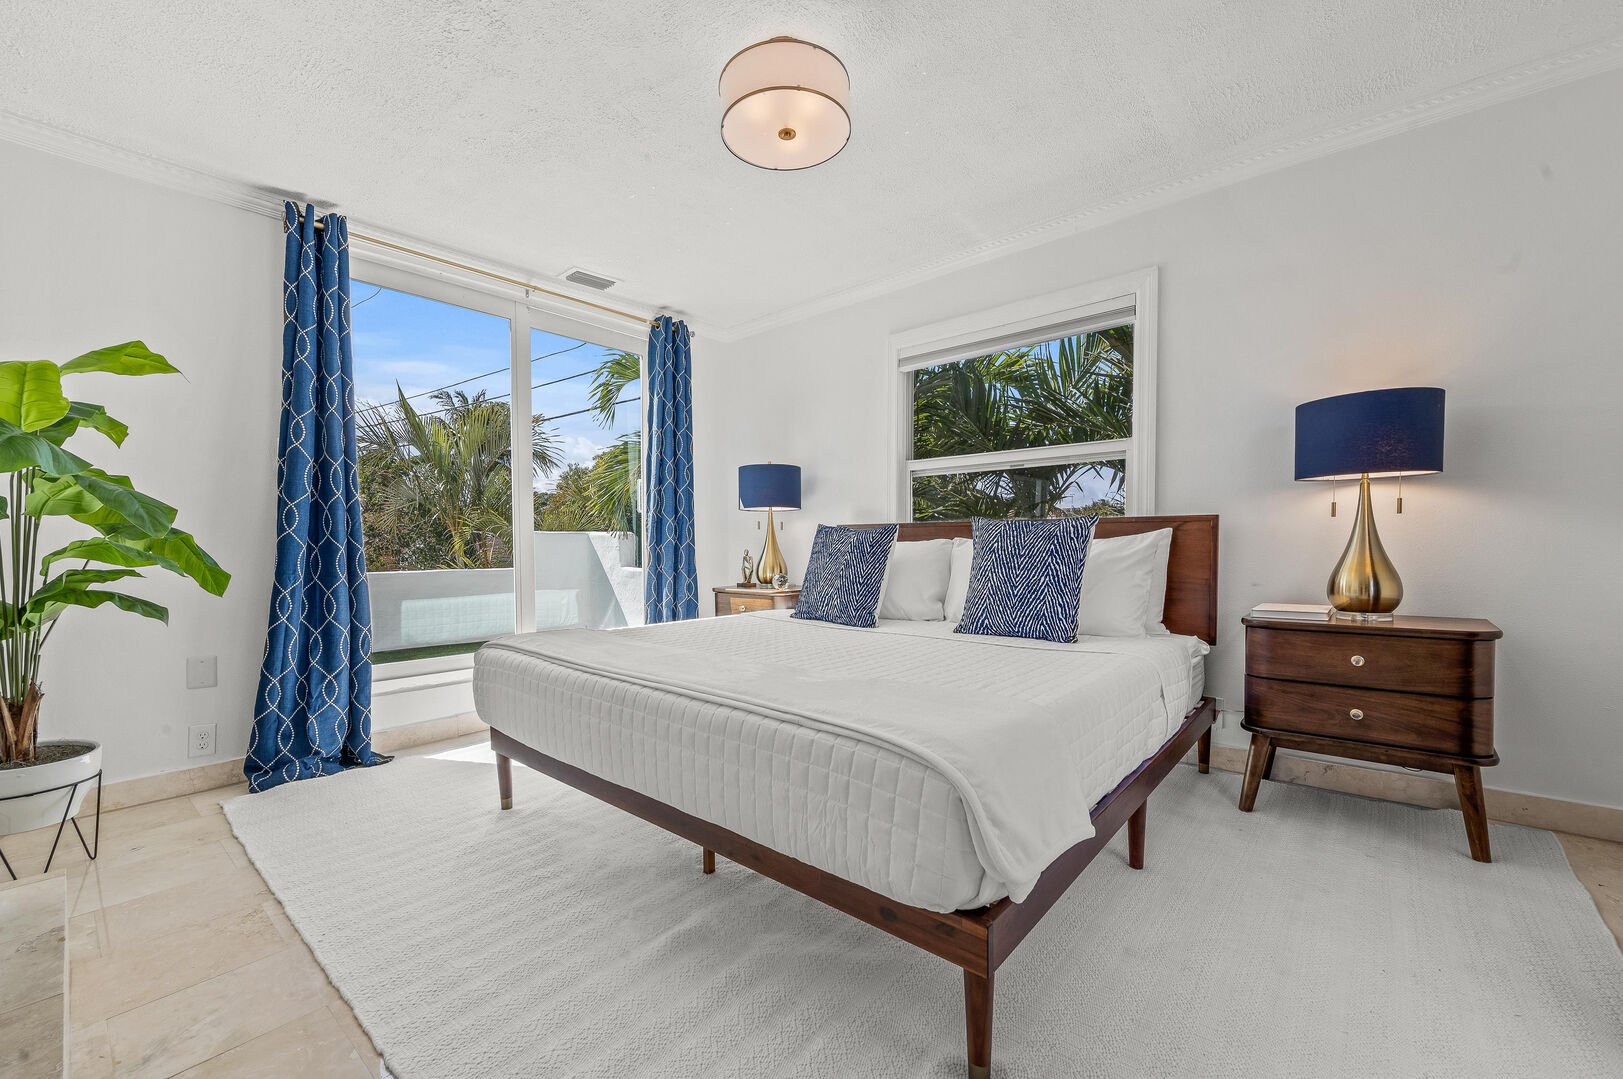 Our master retreat, where a king-sized bed and smart TV create the ultimate relaxation haven.